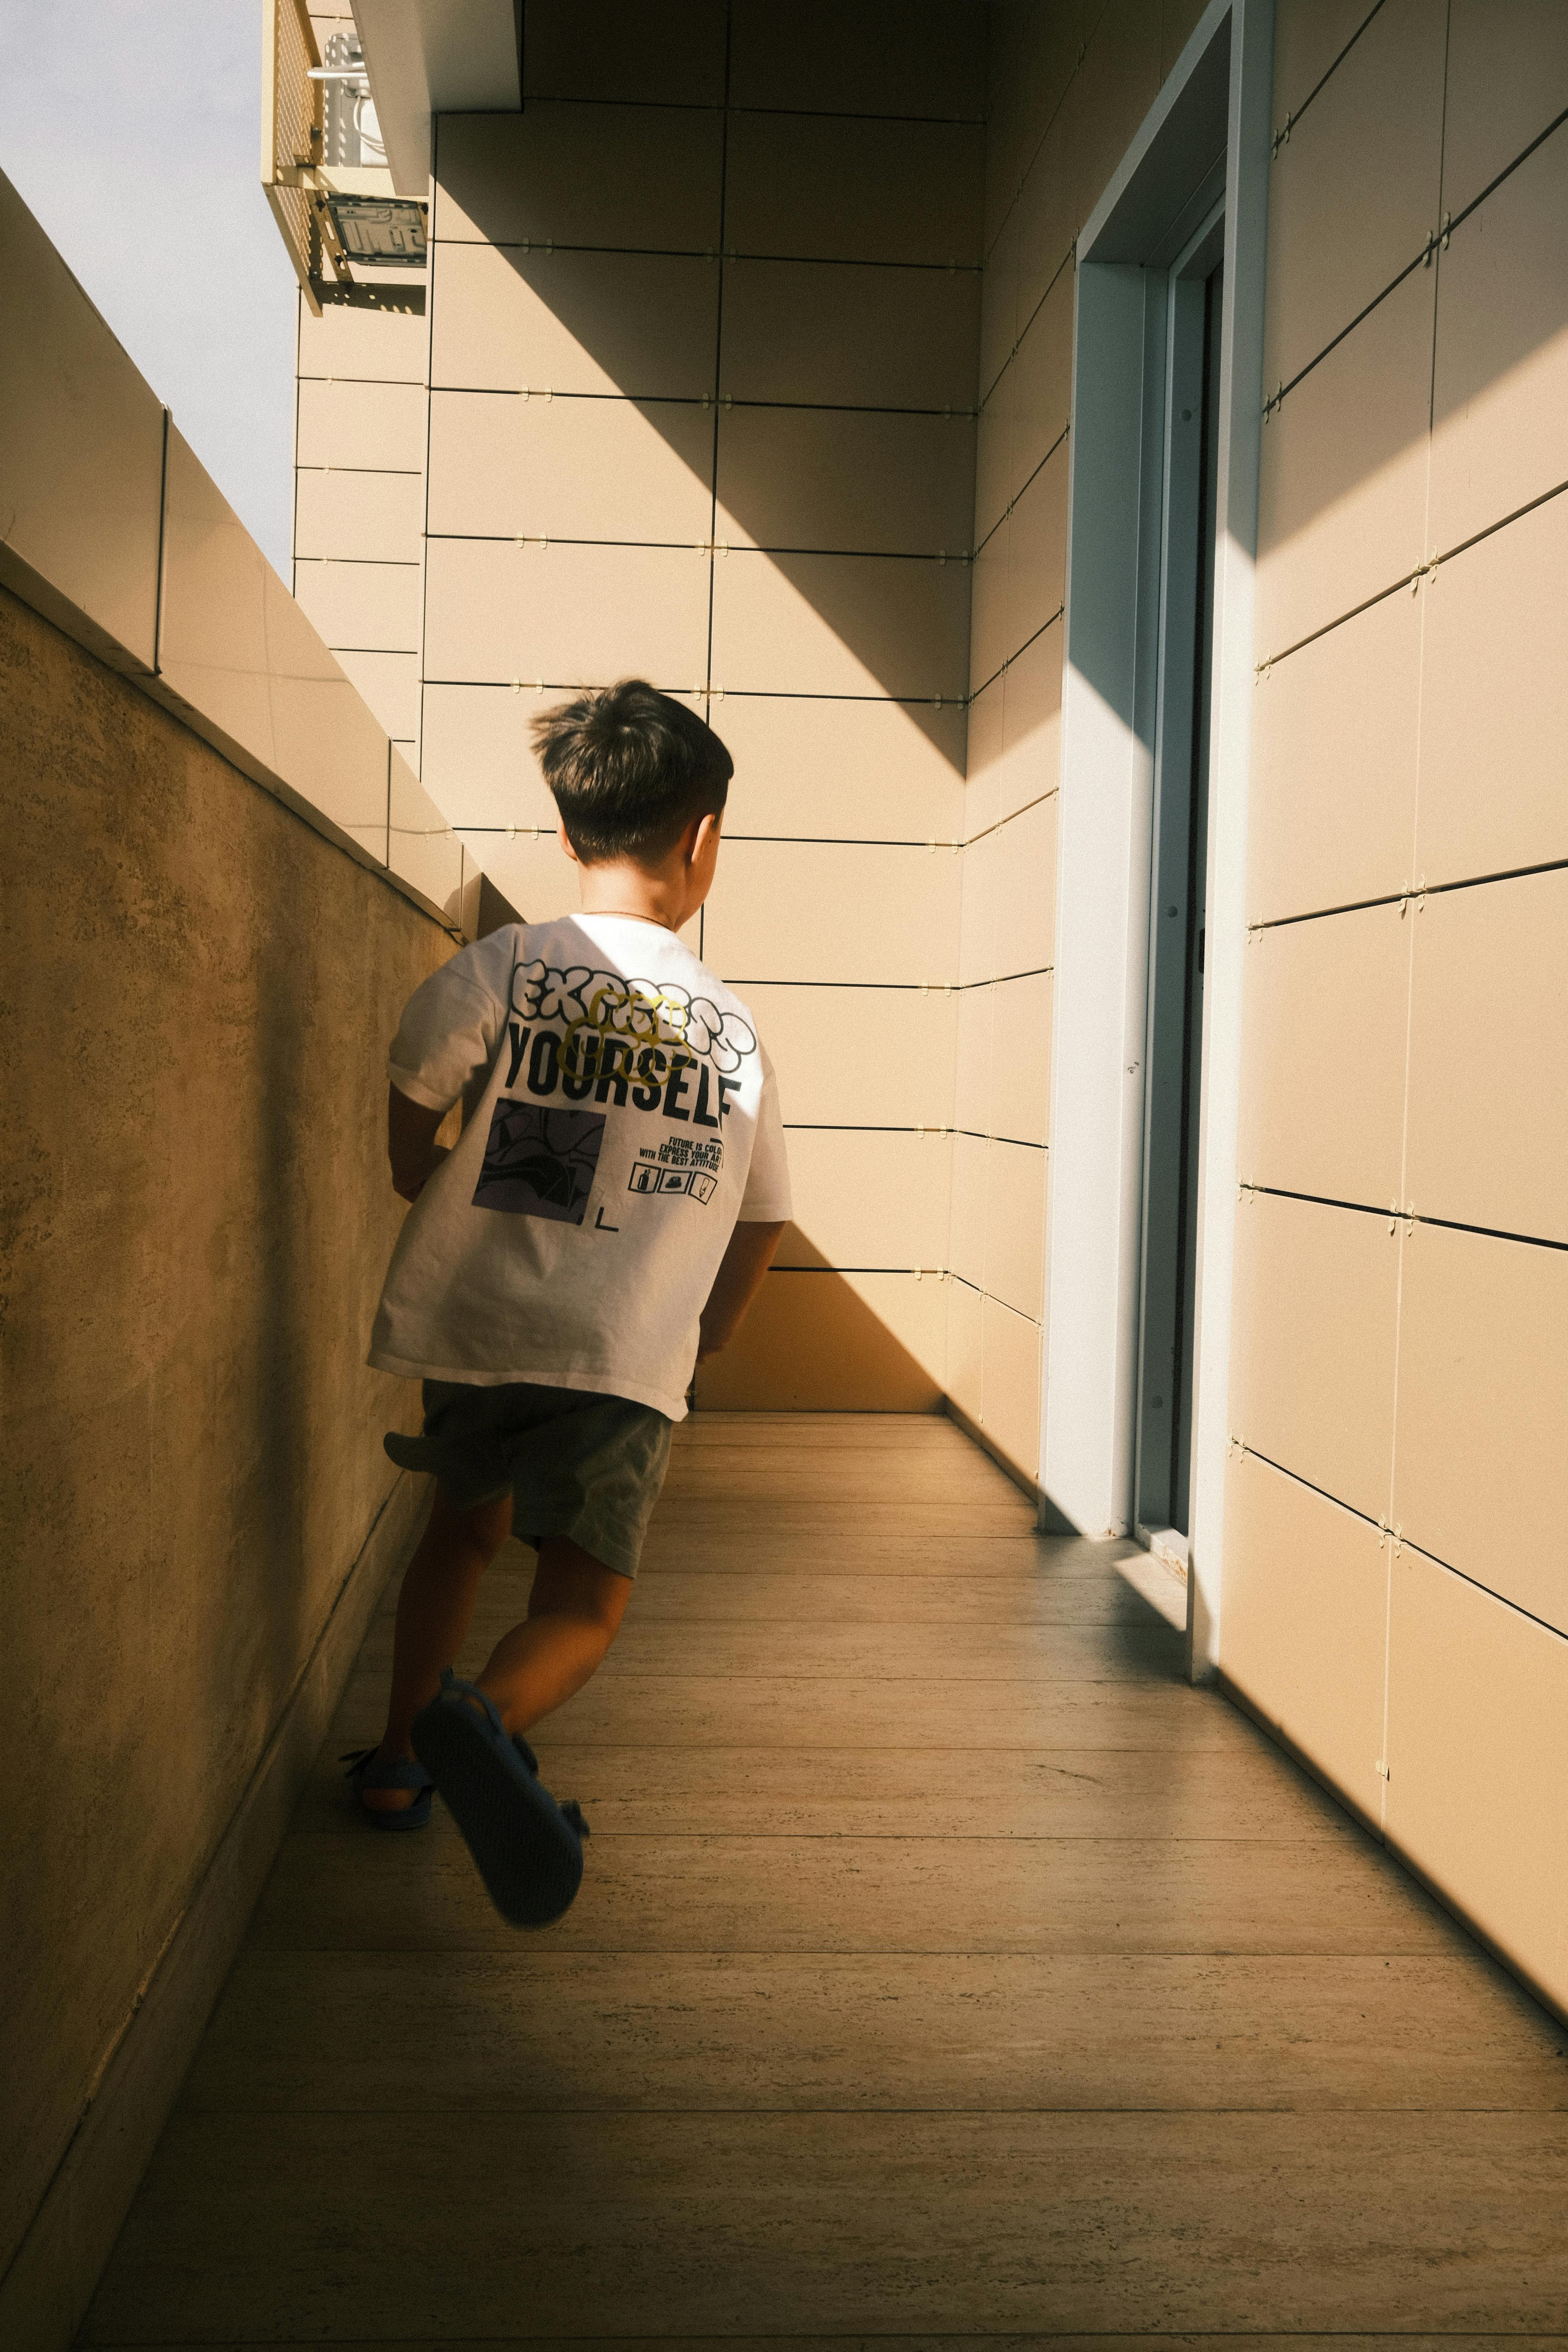 A young boy running | Source: Pexels